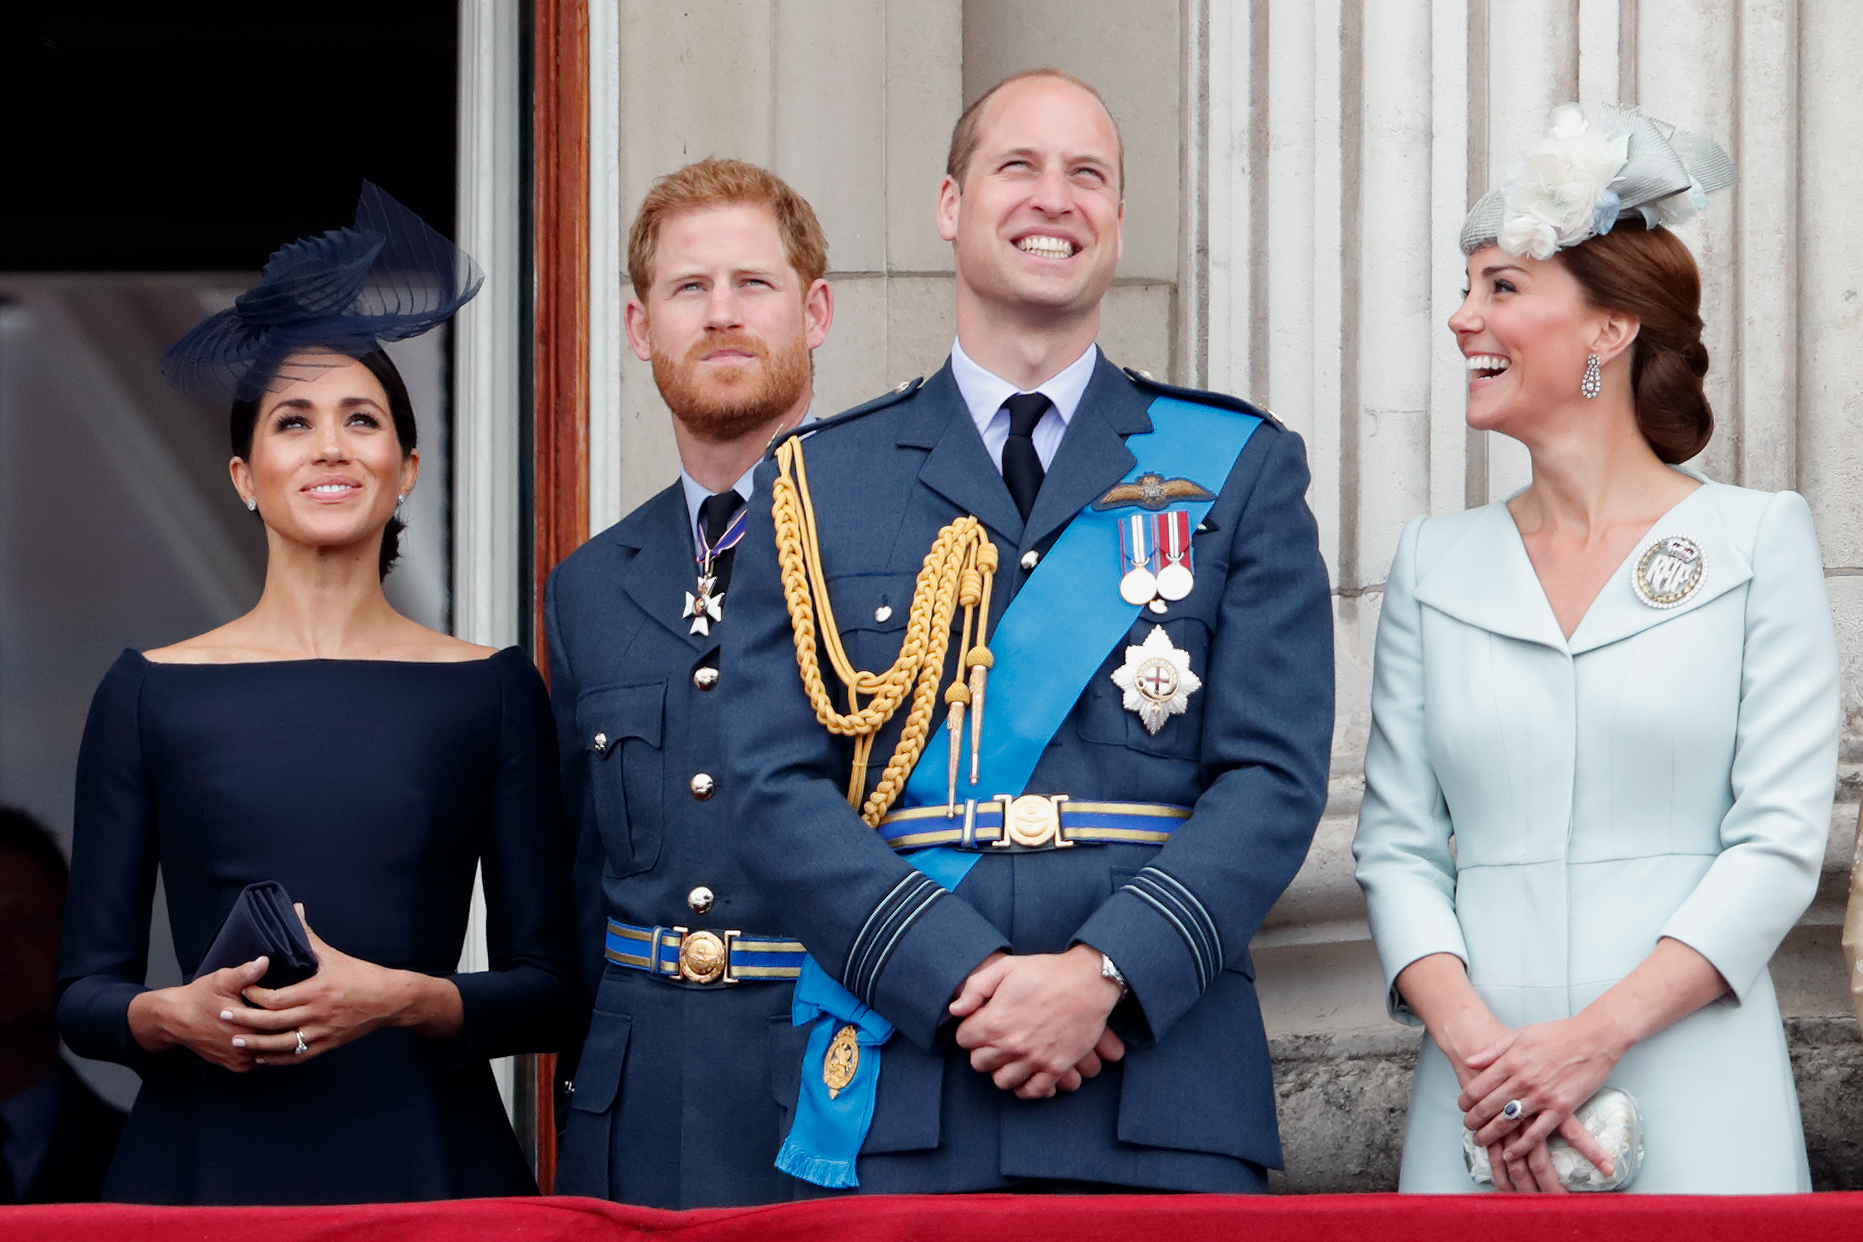 (L to R): Meghan Markle, Prince Harry, Prince William, and Kate Middleton watching a flypast from the balcony of Buckingham Palace